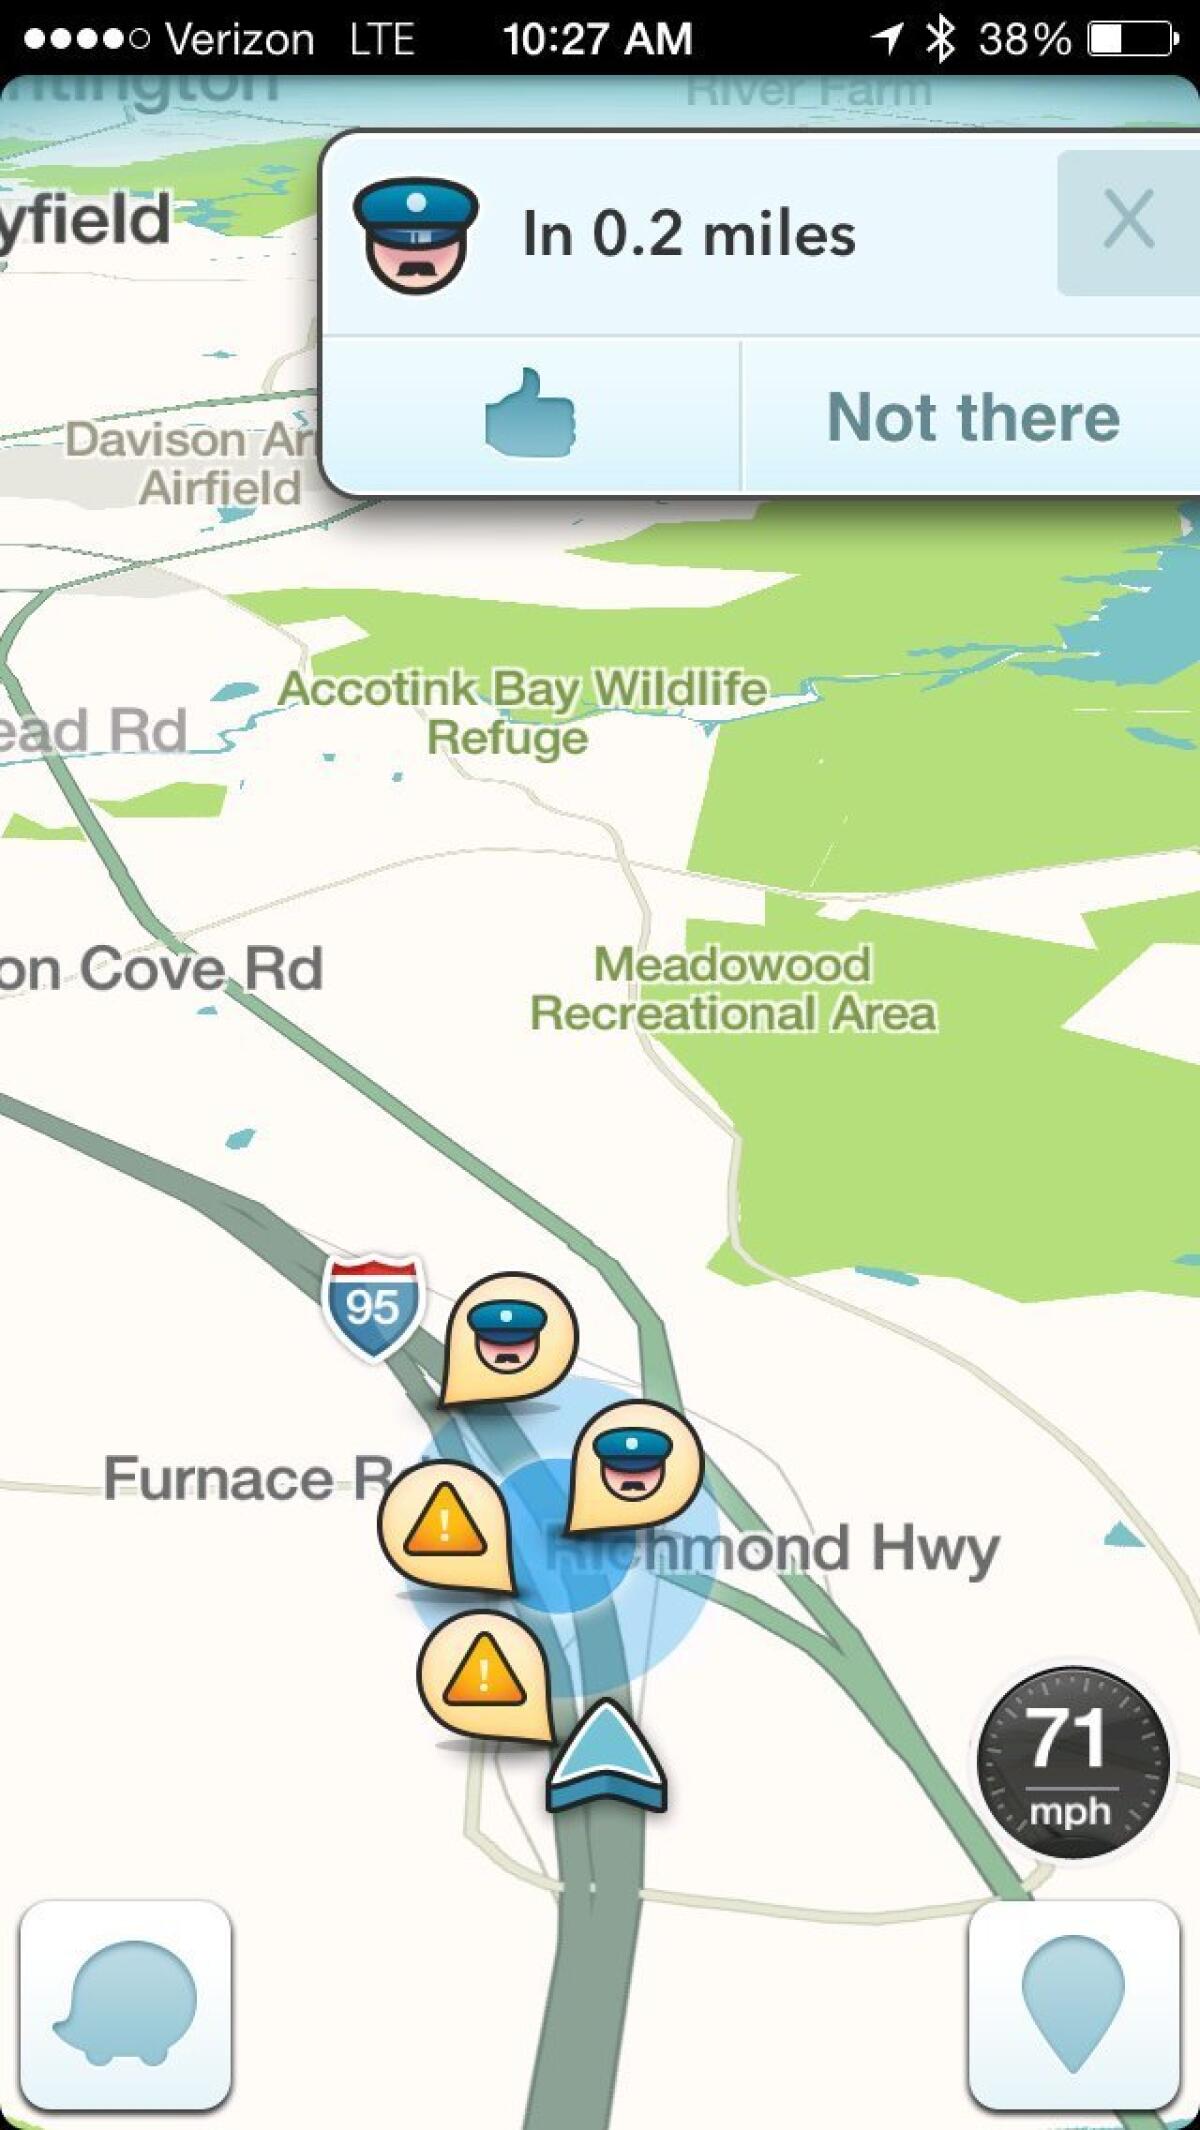 An image from the Waze app indicates a location where police were seen in the Washington, D.C. area.